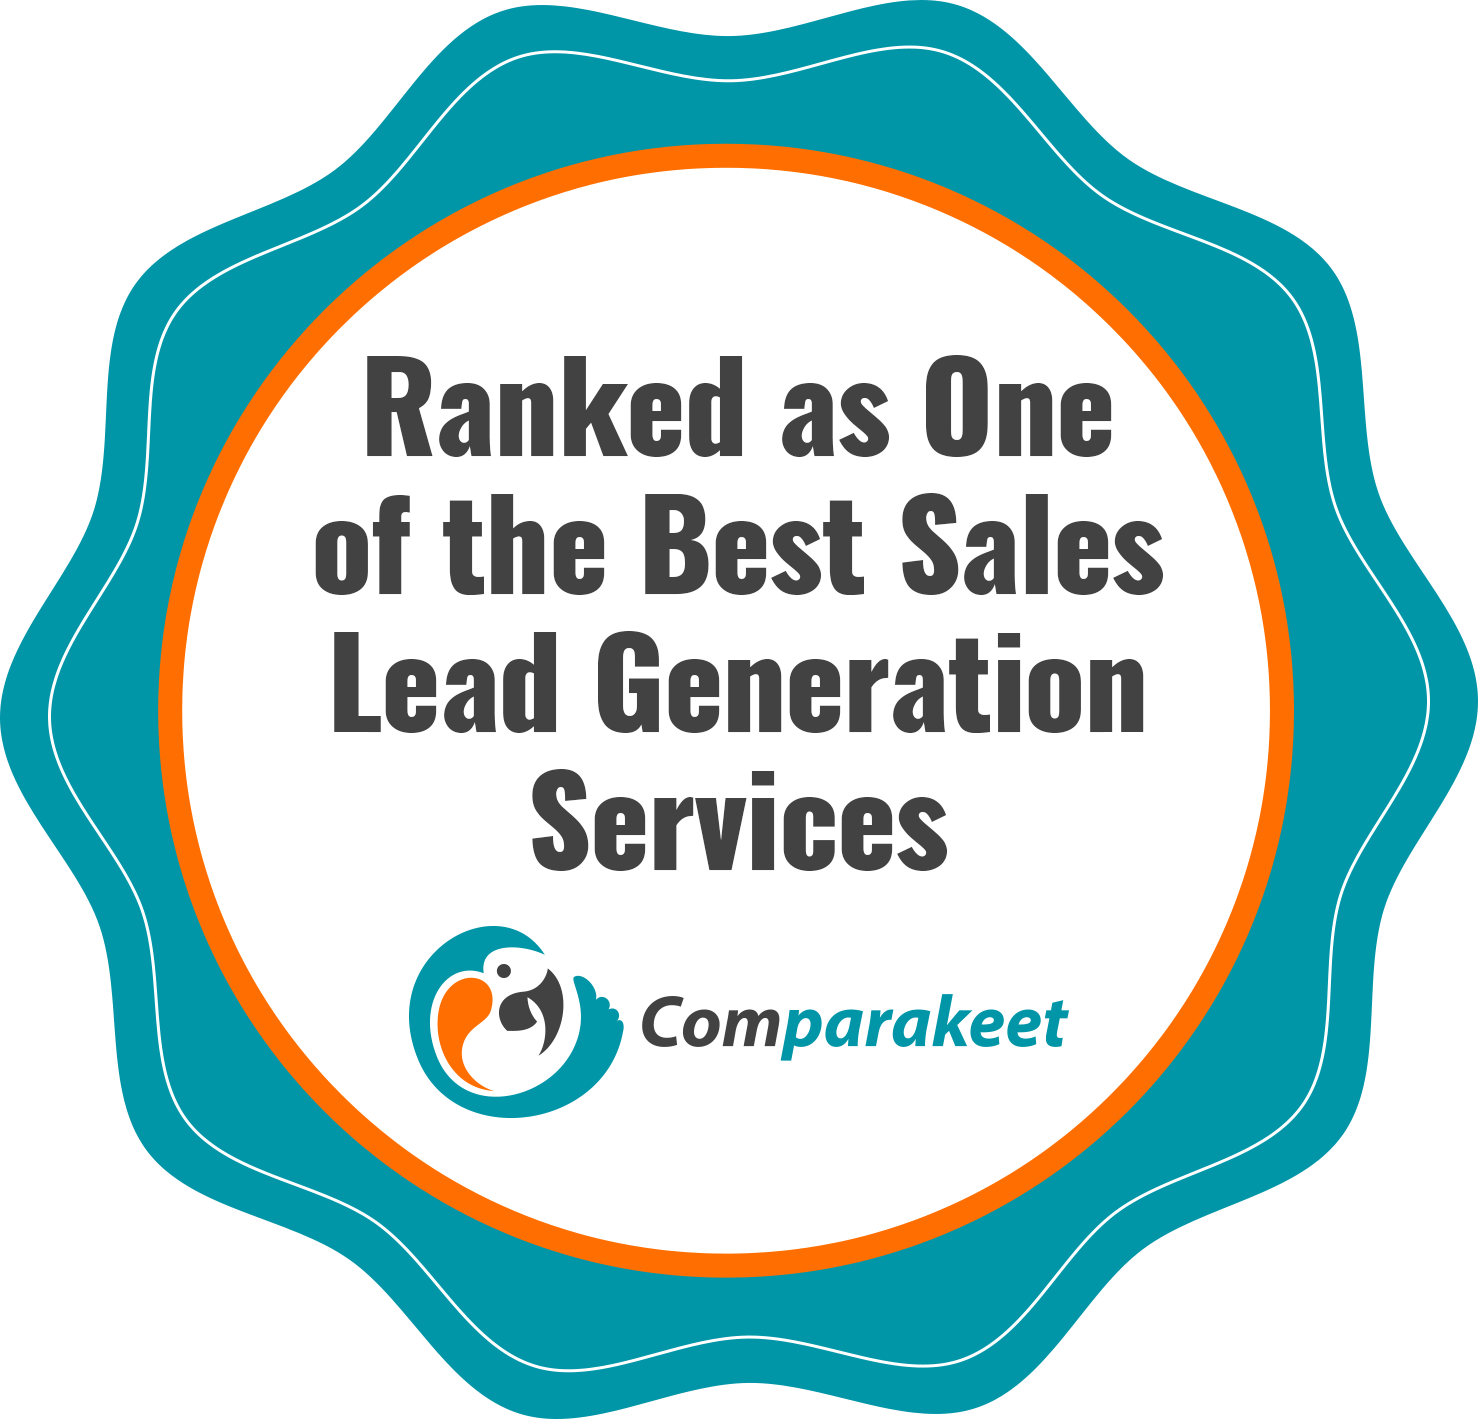 Ranked as One of the Best Sales Lead Generation Services